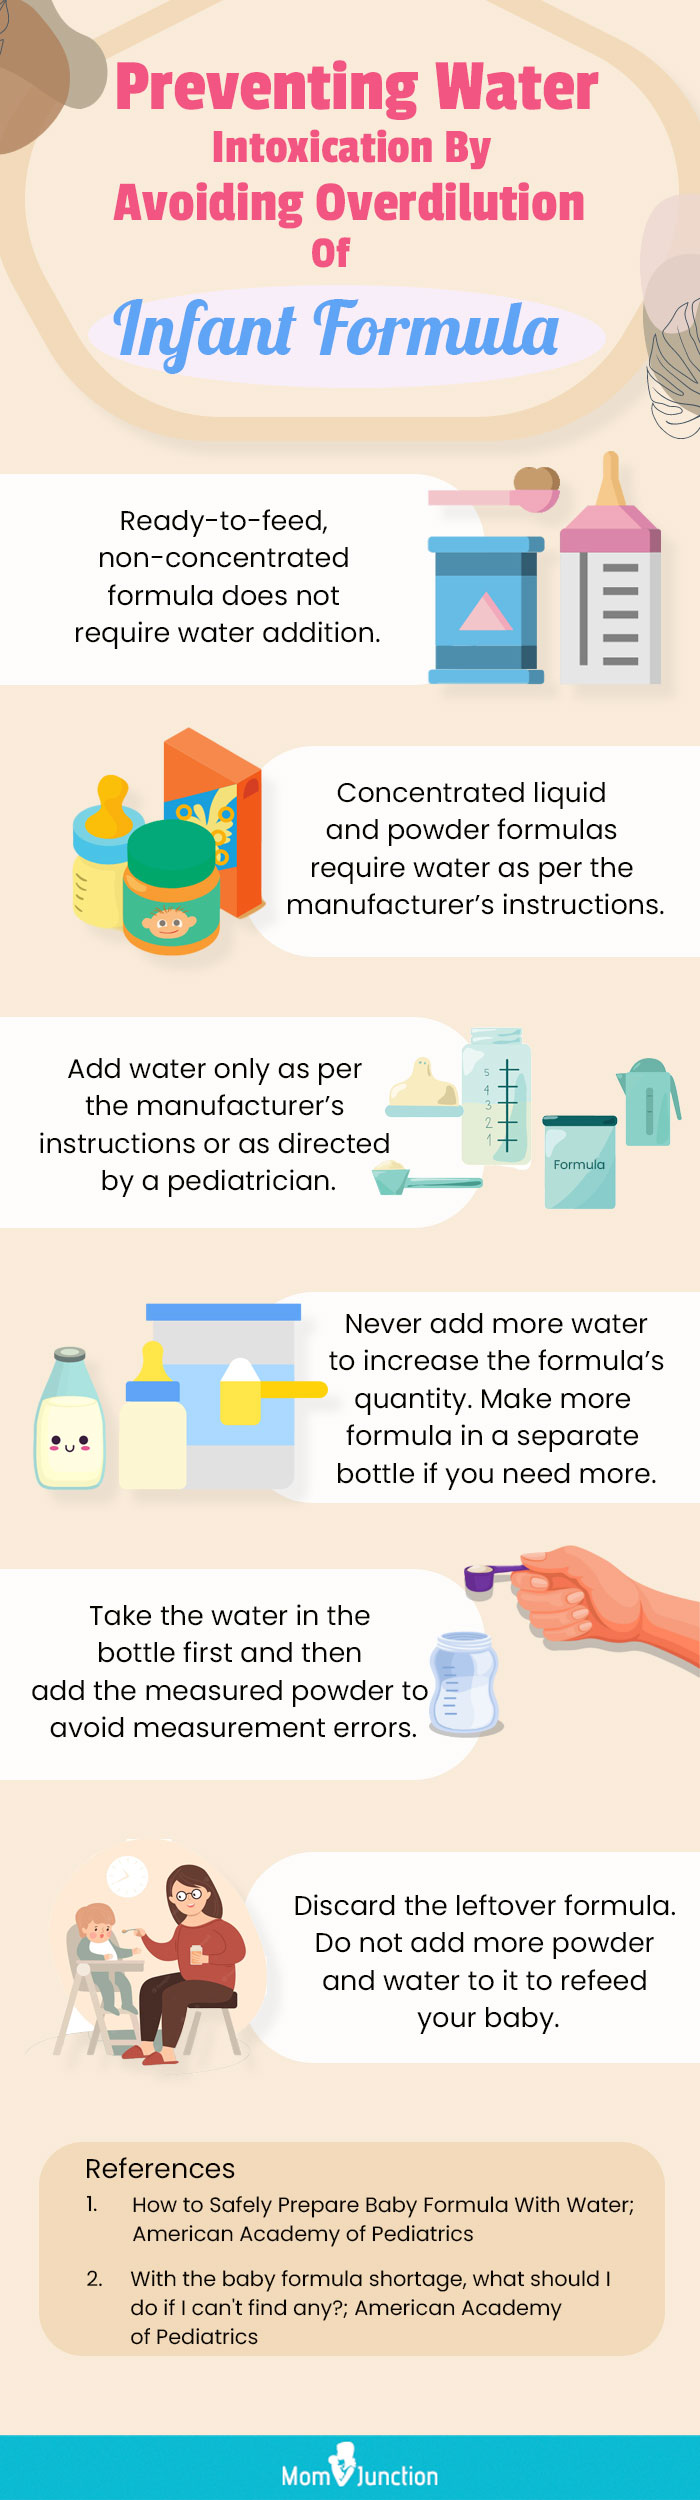 preventing water intoxication by avoiding overdilution of infant formula (infographic)